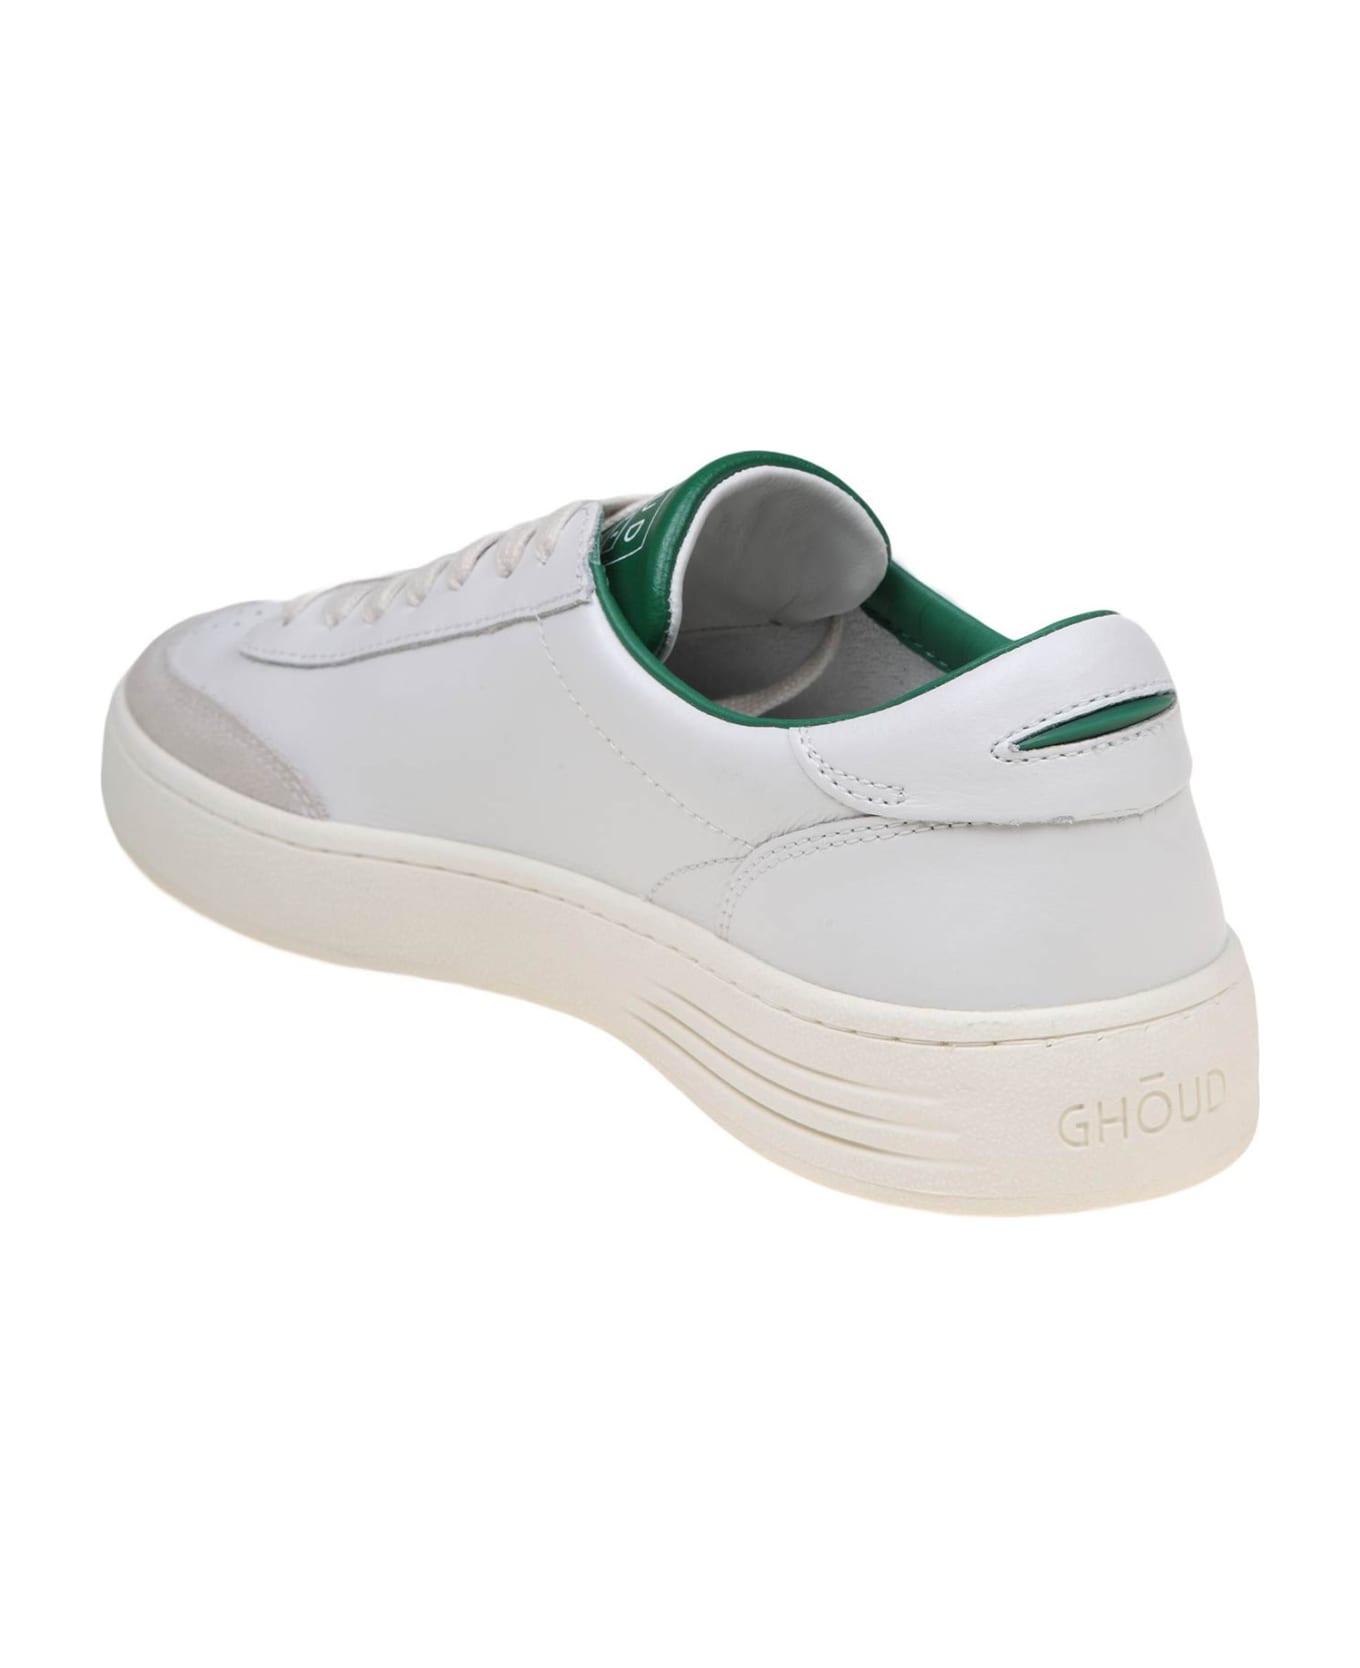 GHOUD Lido Low Sneakers In White/green Leather And Suede - Green